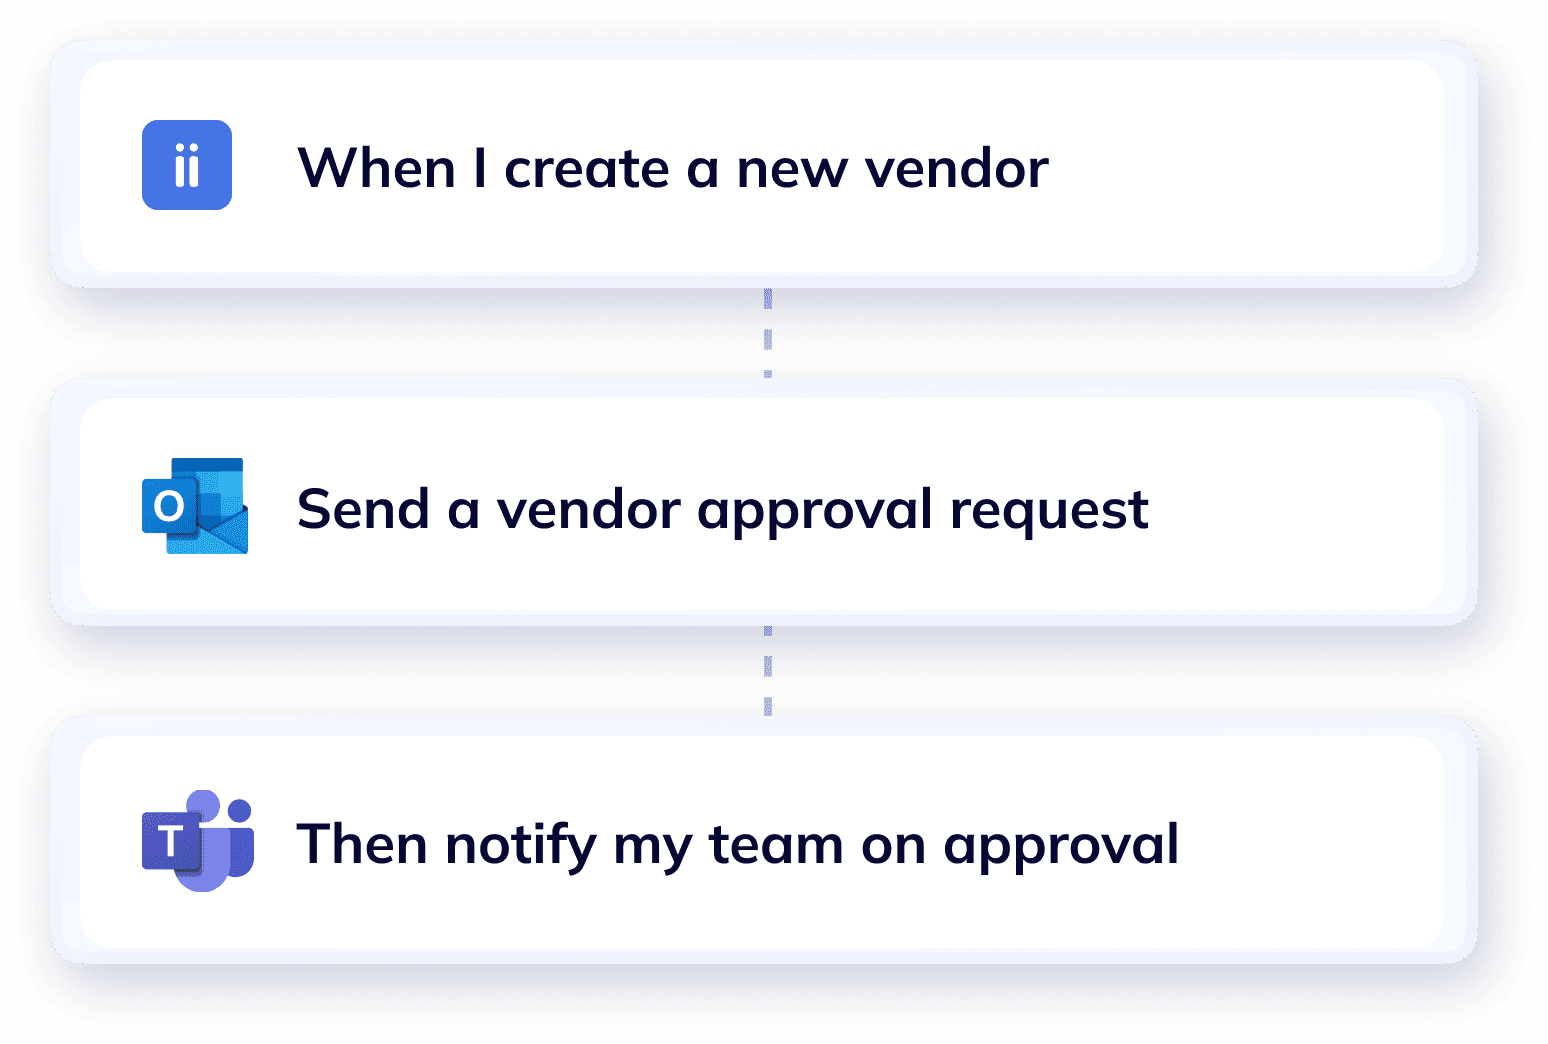 Workflow of requesting approval for a new vendor in Wiise